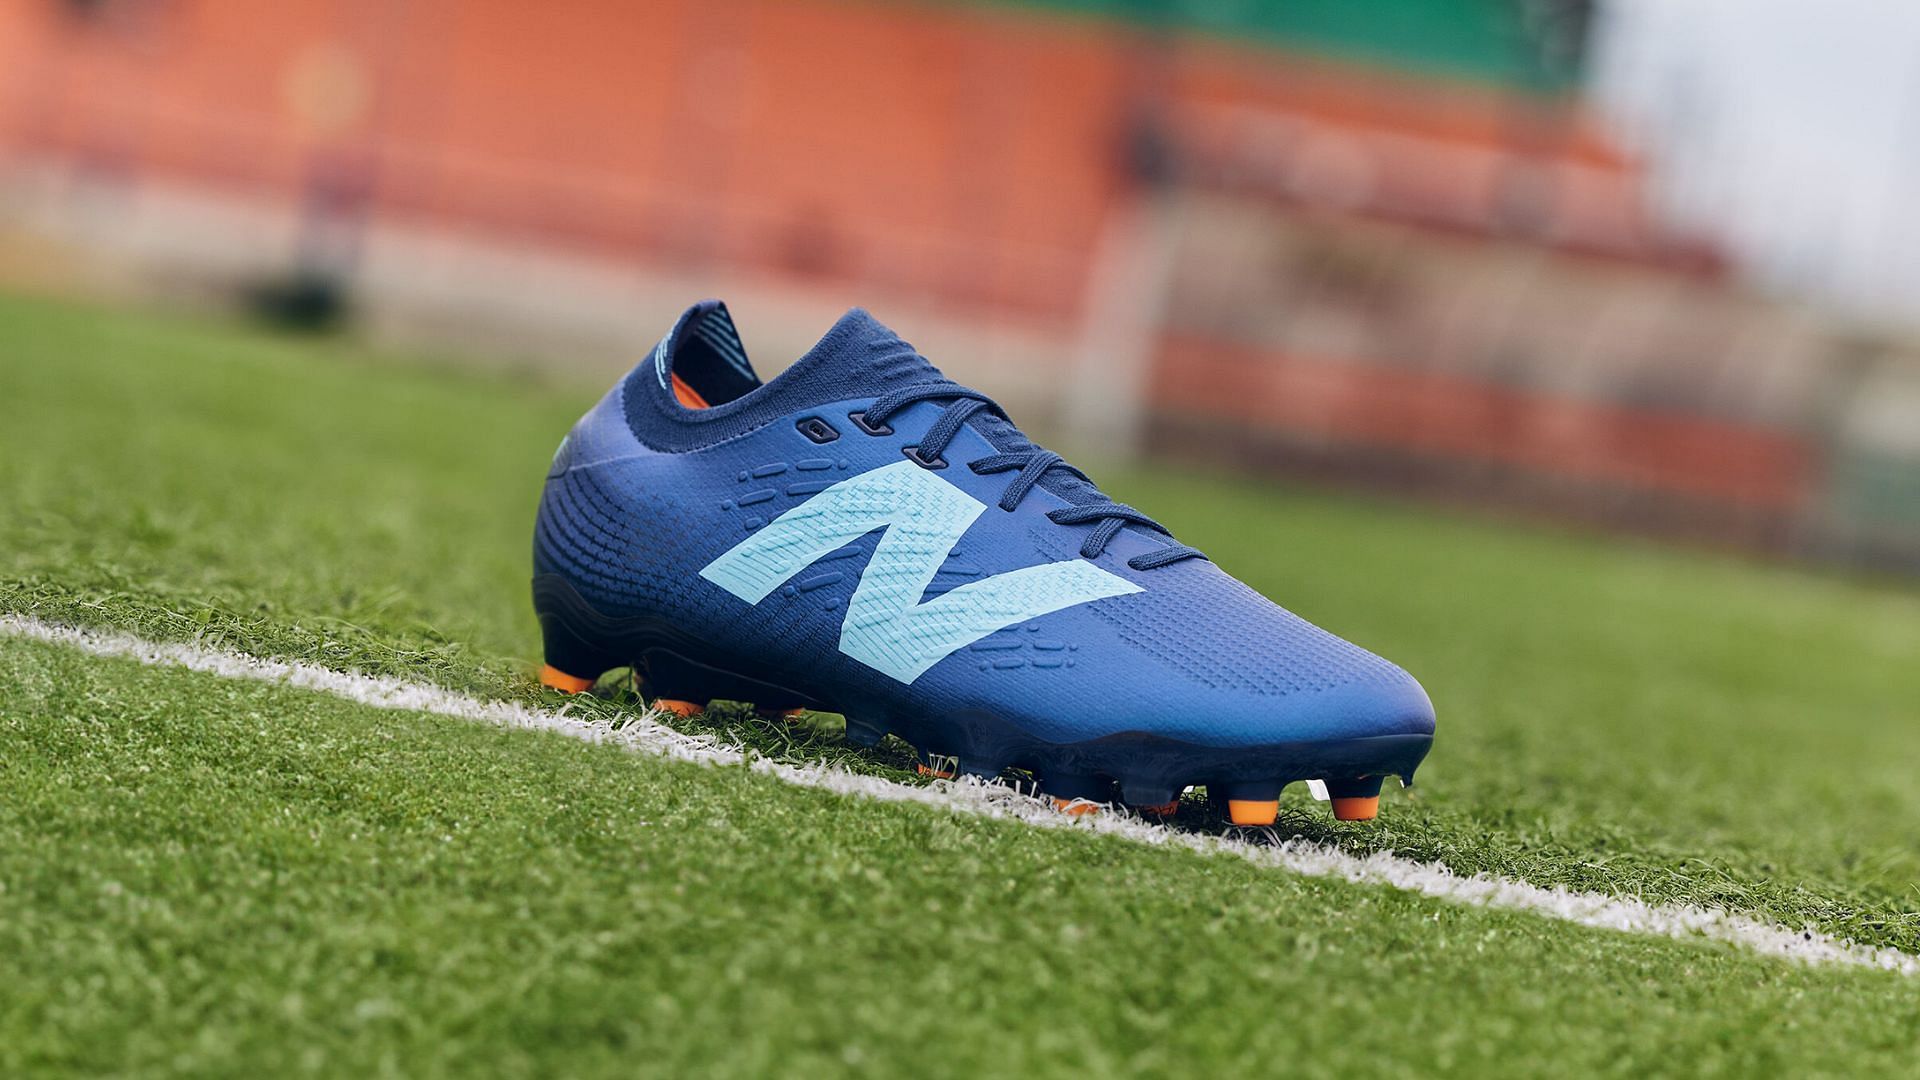 New Balance Tekela V4 + Football Boots: Where to get, price, and more  details explored